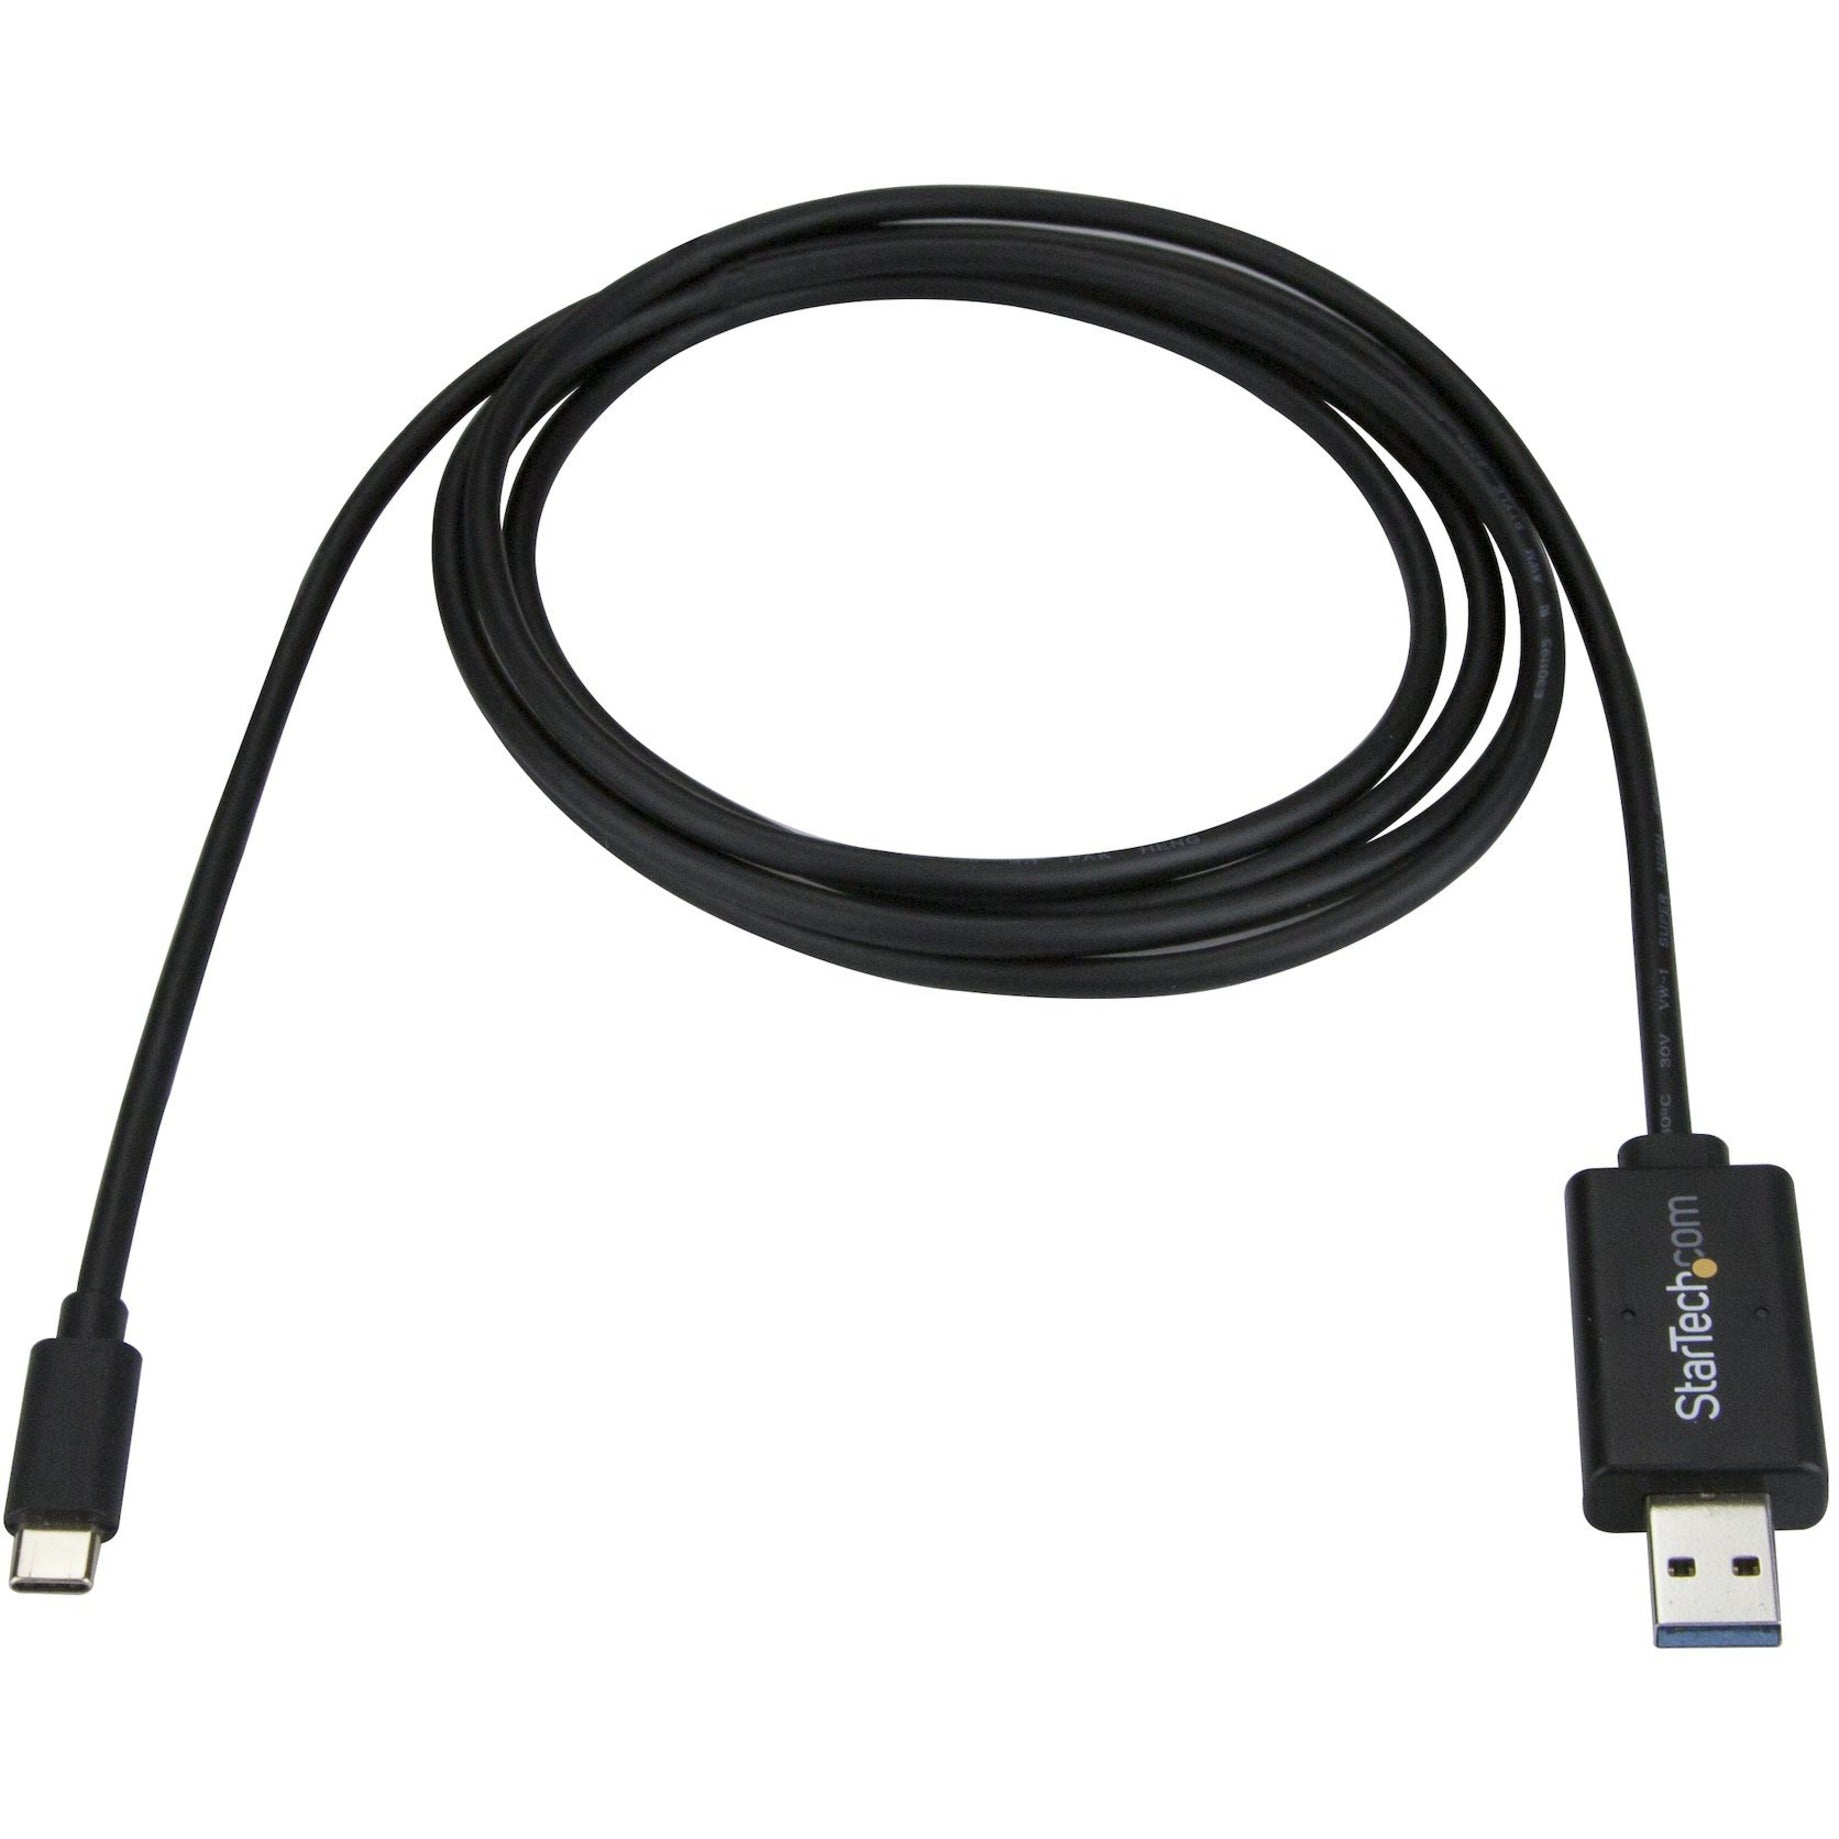 StarTech.com USBC3LINK USB-C to USB 3.0 Data Transfer Cable for Mac and Windows, 2m (6ft), Easy File Transfer